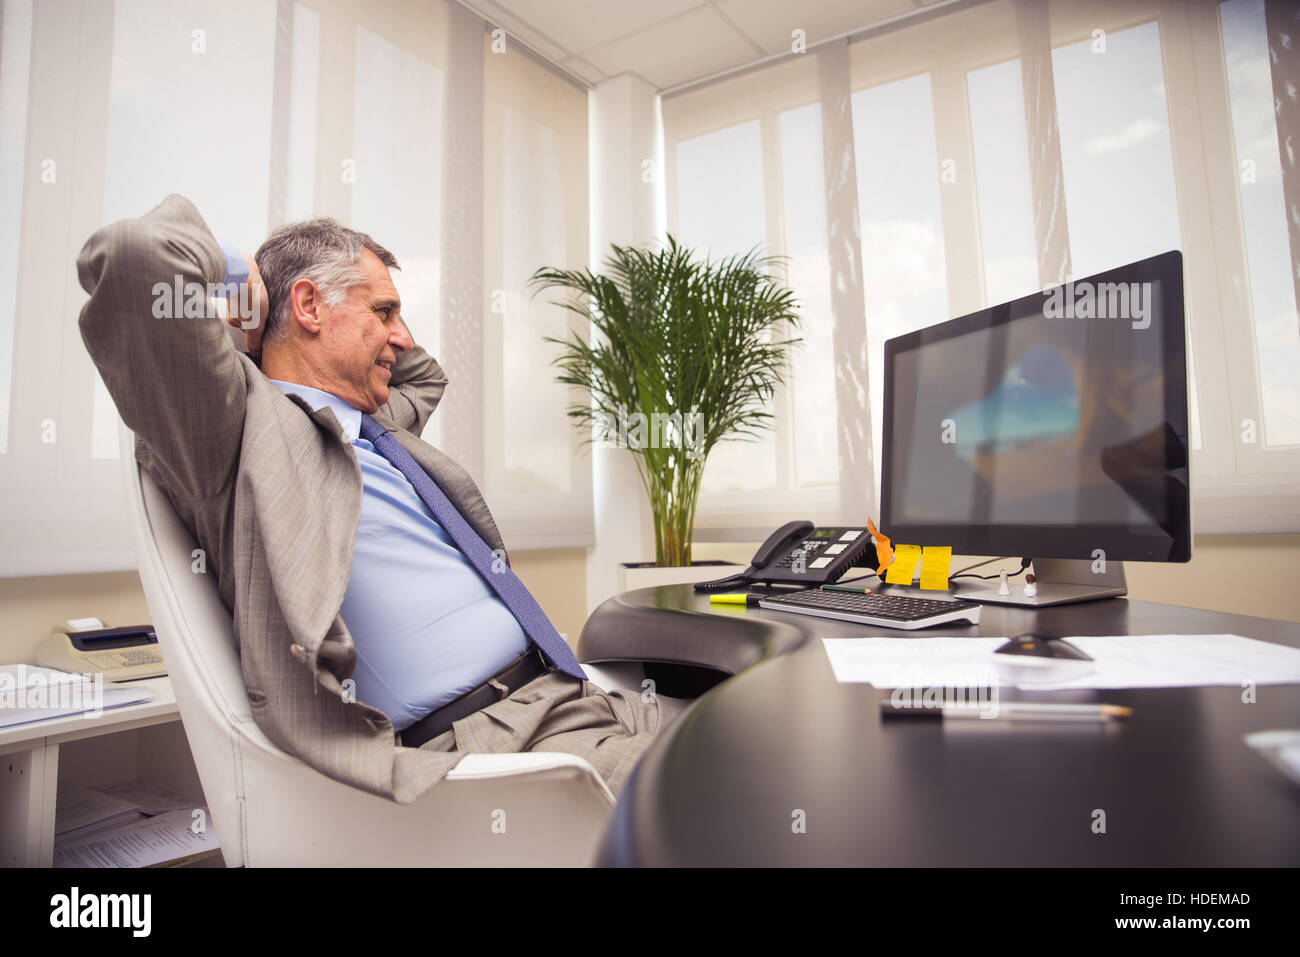 Businessman In Office Relaxing Leaning Back On Chair Stock Photo Alamy